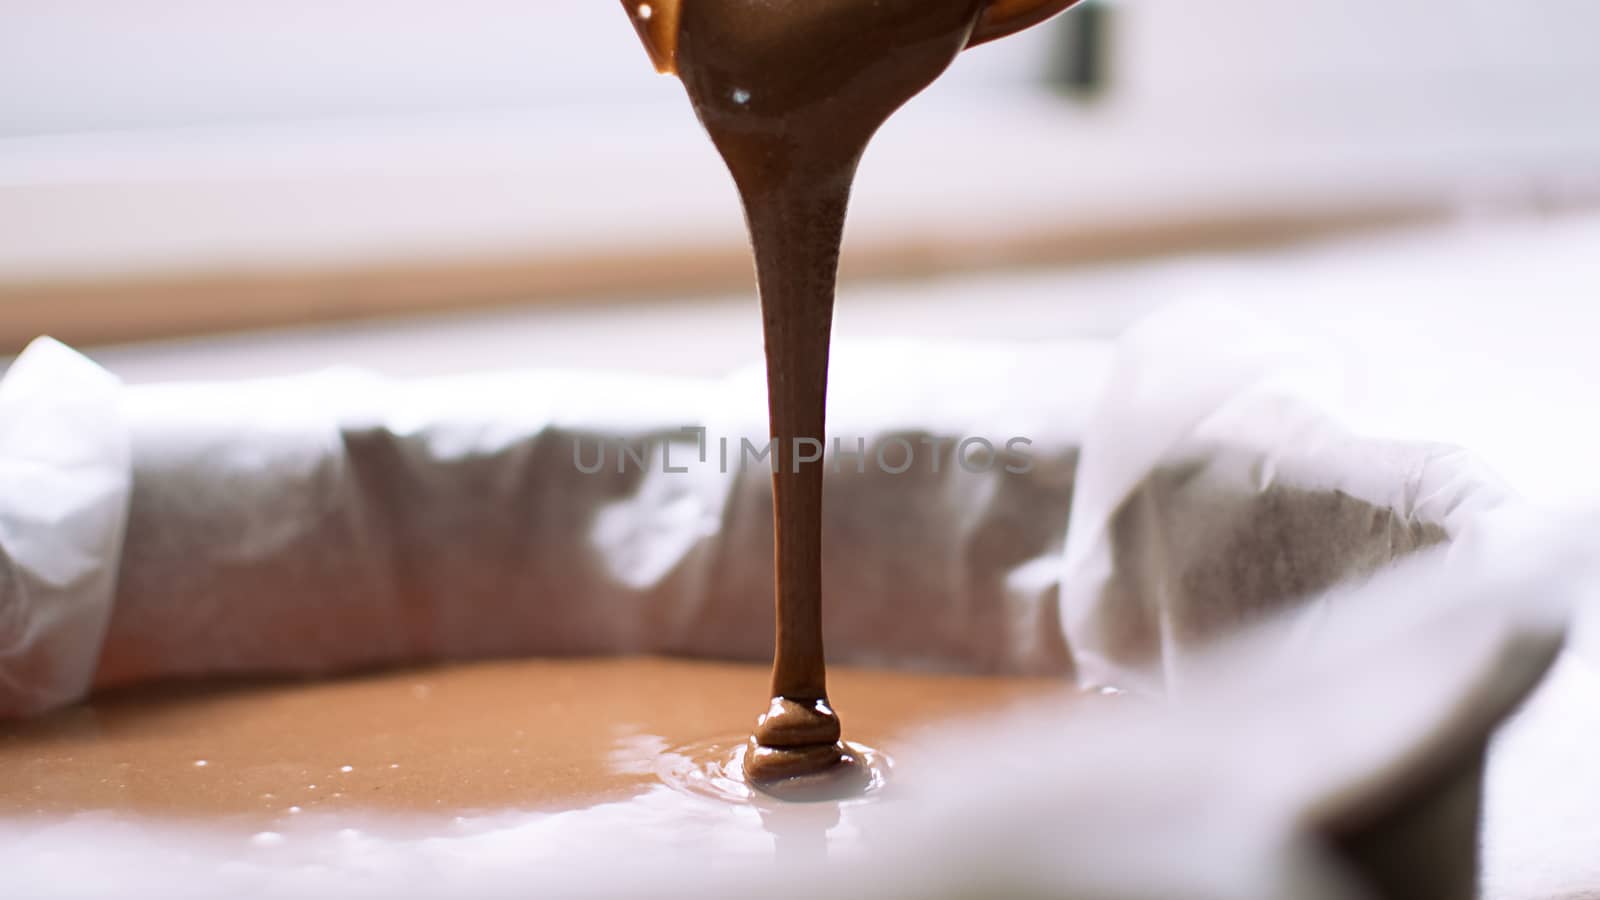 A close-up of chocolate milk liquid being poured into the form of a confectionery syringe in the form mold or mould. Preparation of chocolate sweets, biscuits, cooking process. by worledit